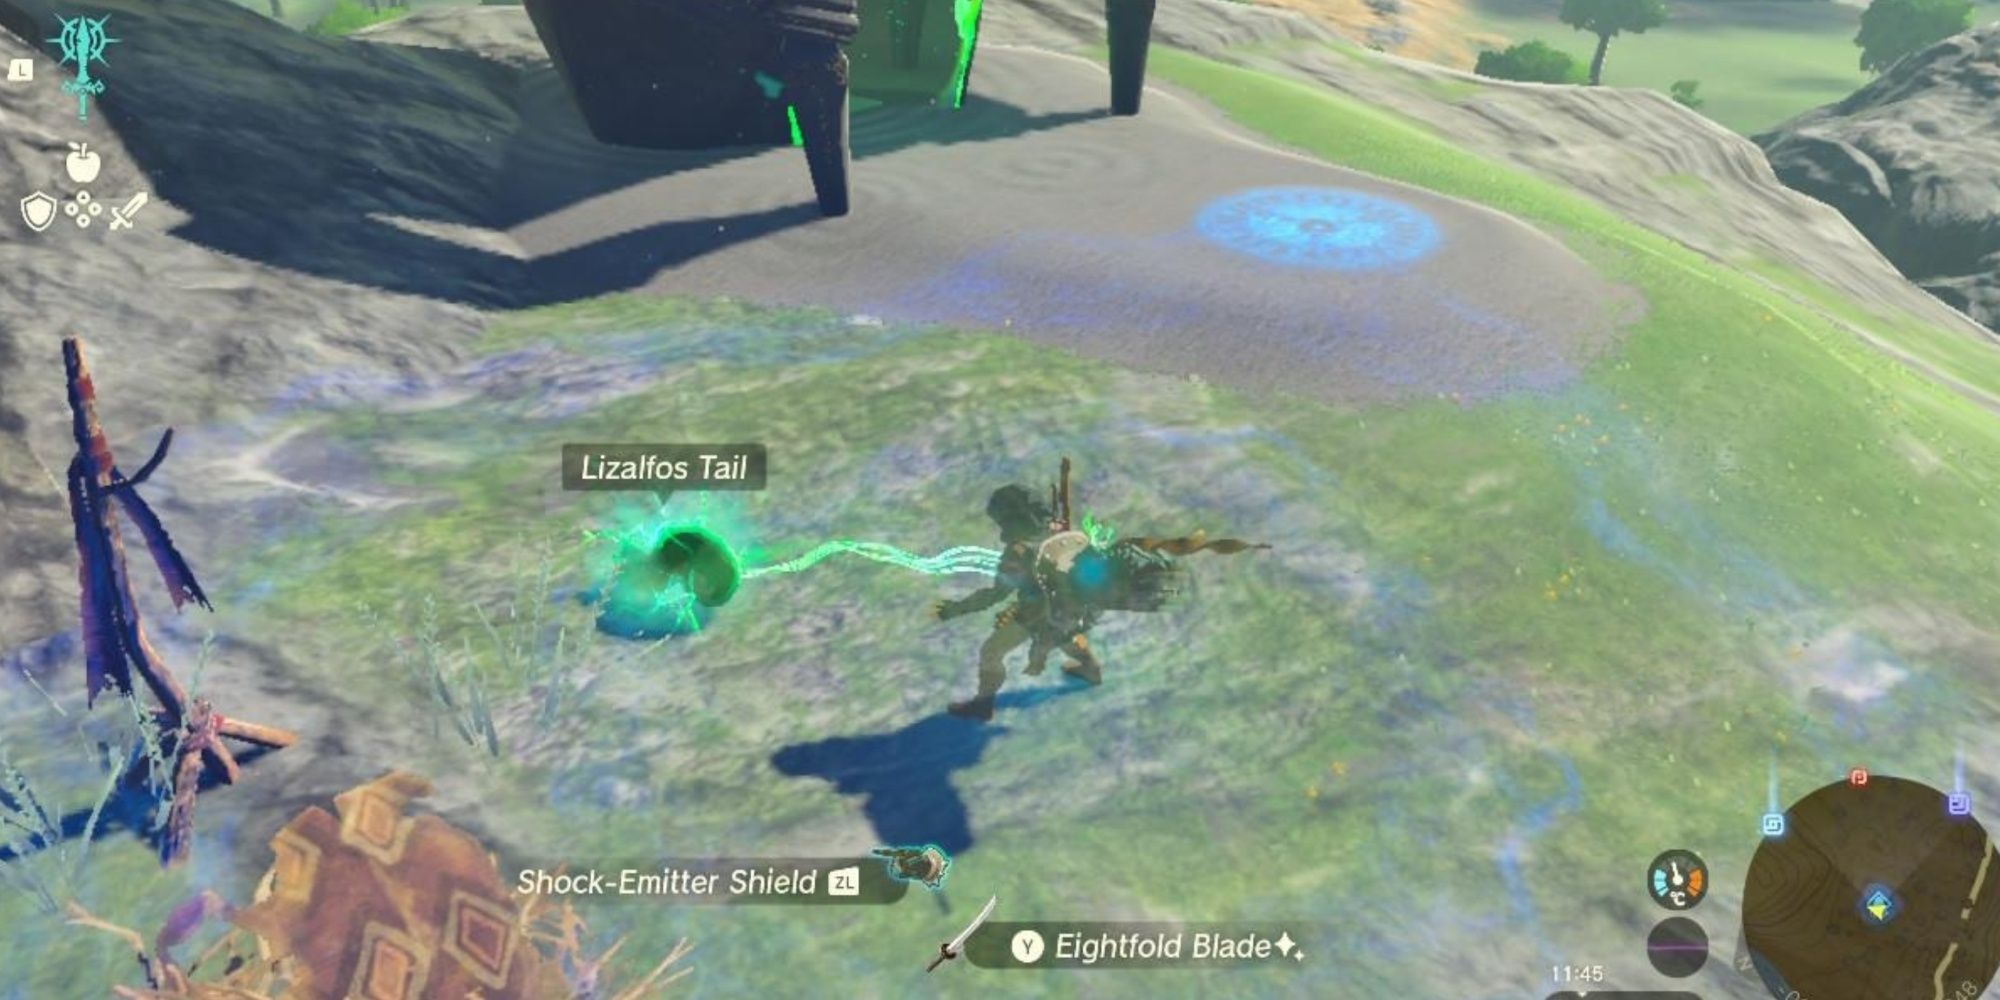 Link connecting the tail of Lizalfos